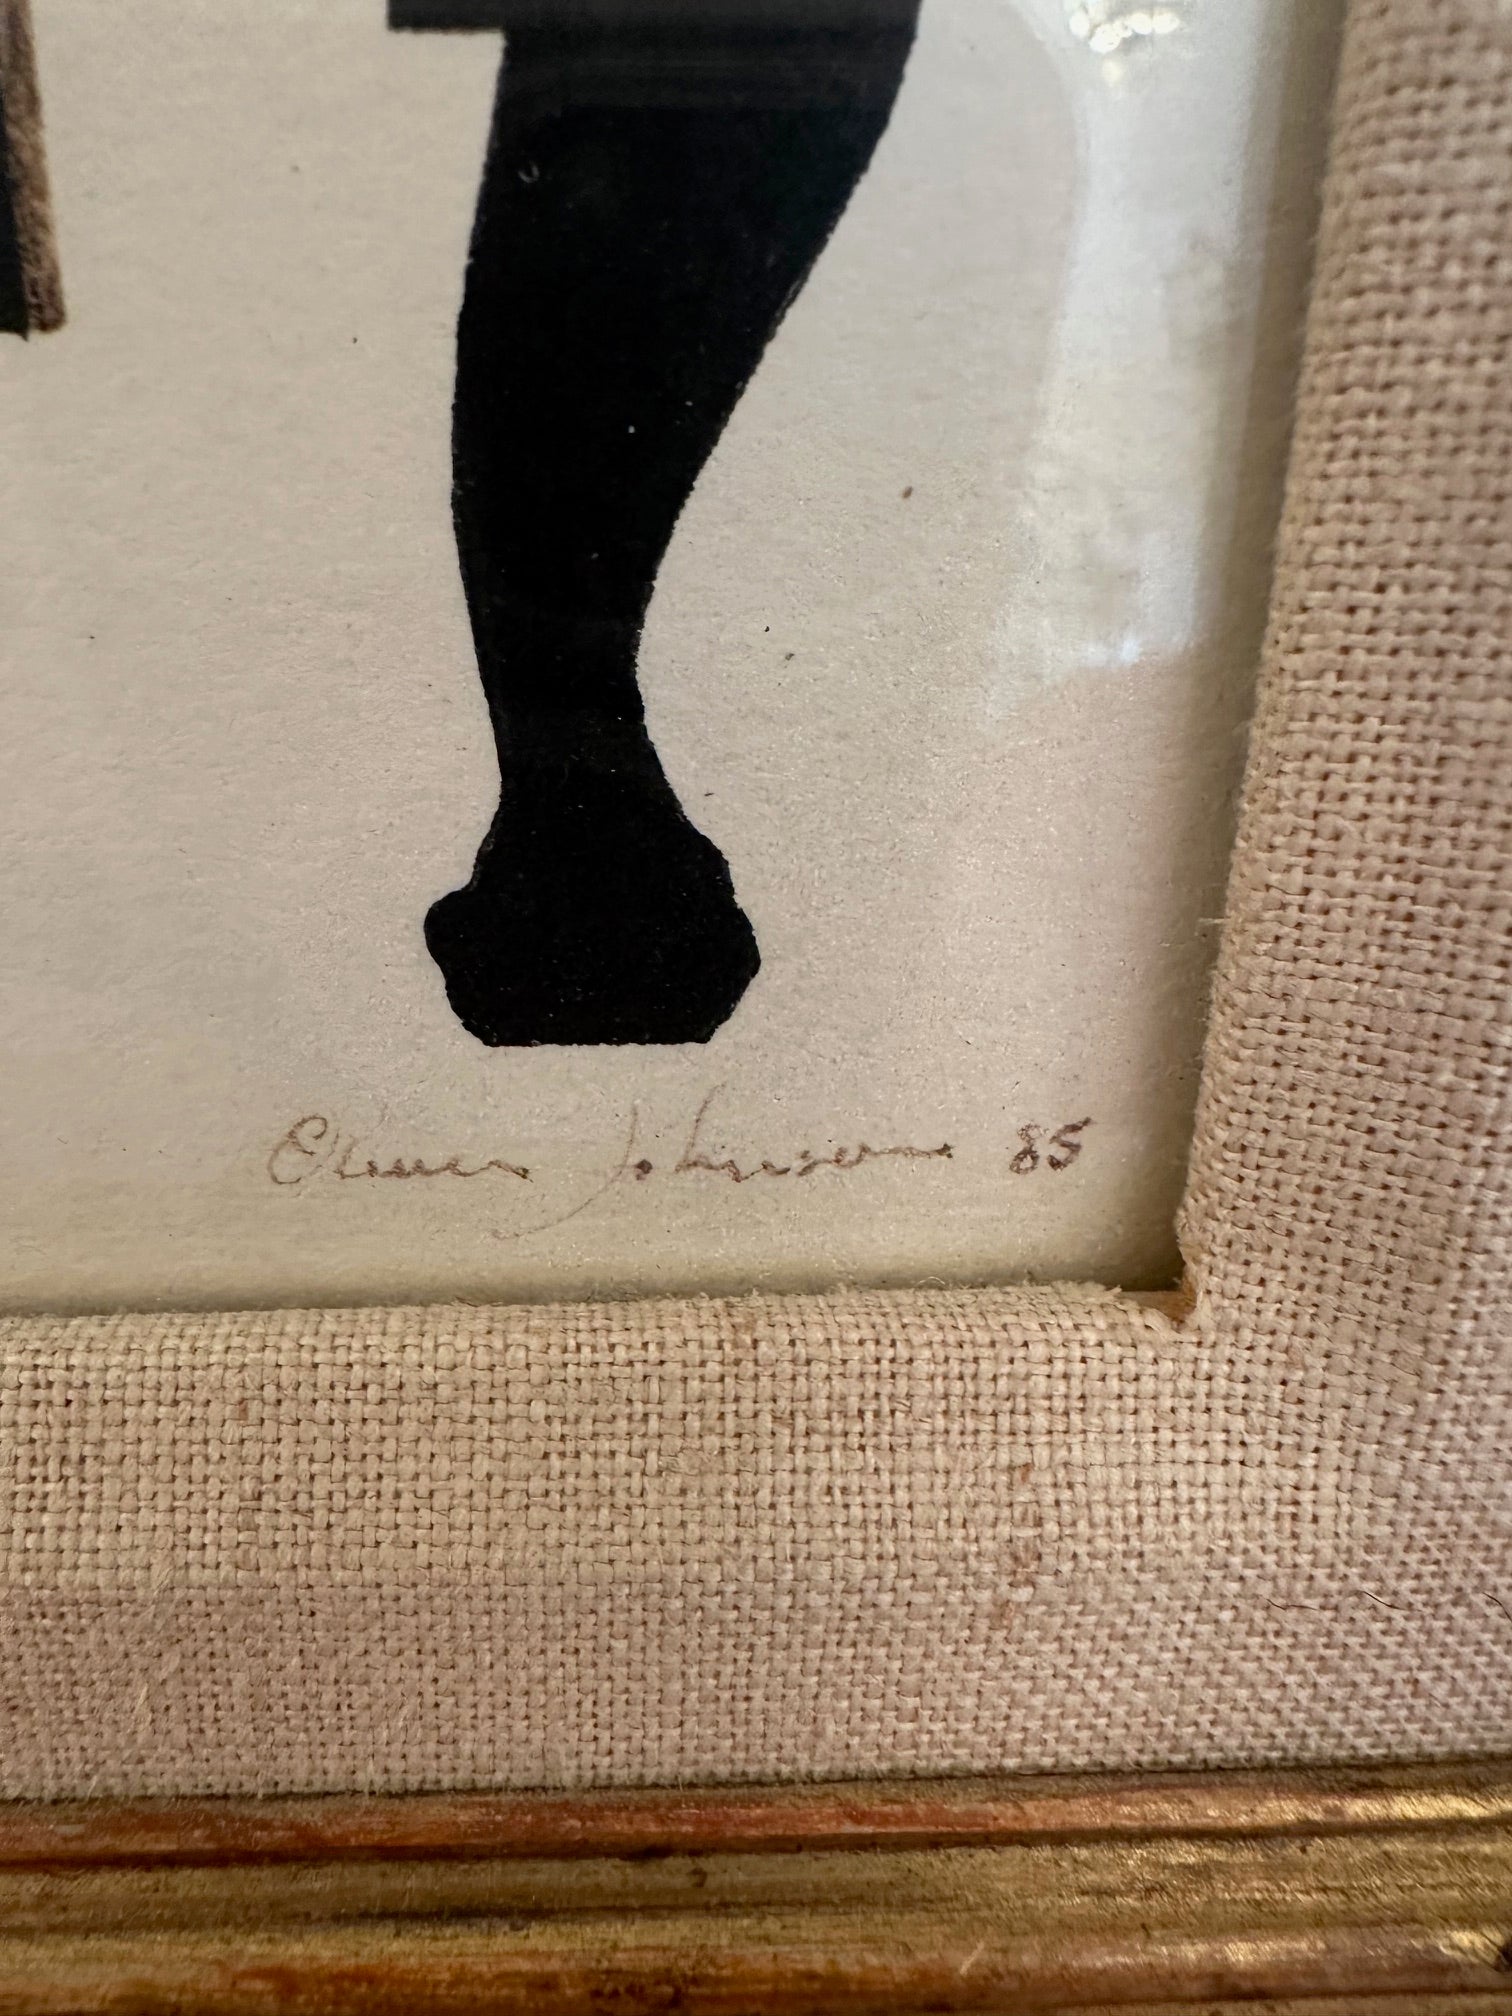 Striking pen and ink art in black and white of a neoclassical armchair and ocelot cat.  Handsomely framed in linen and framed in giltwood.  Signed and dated lower right, Oliver Johnson.